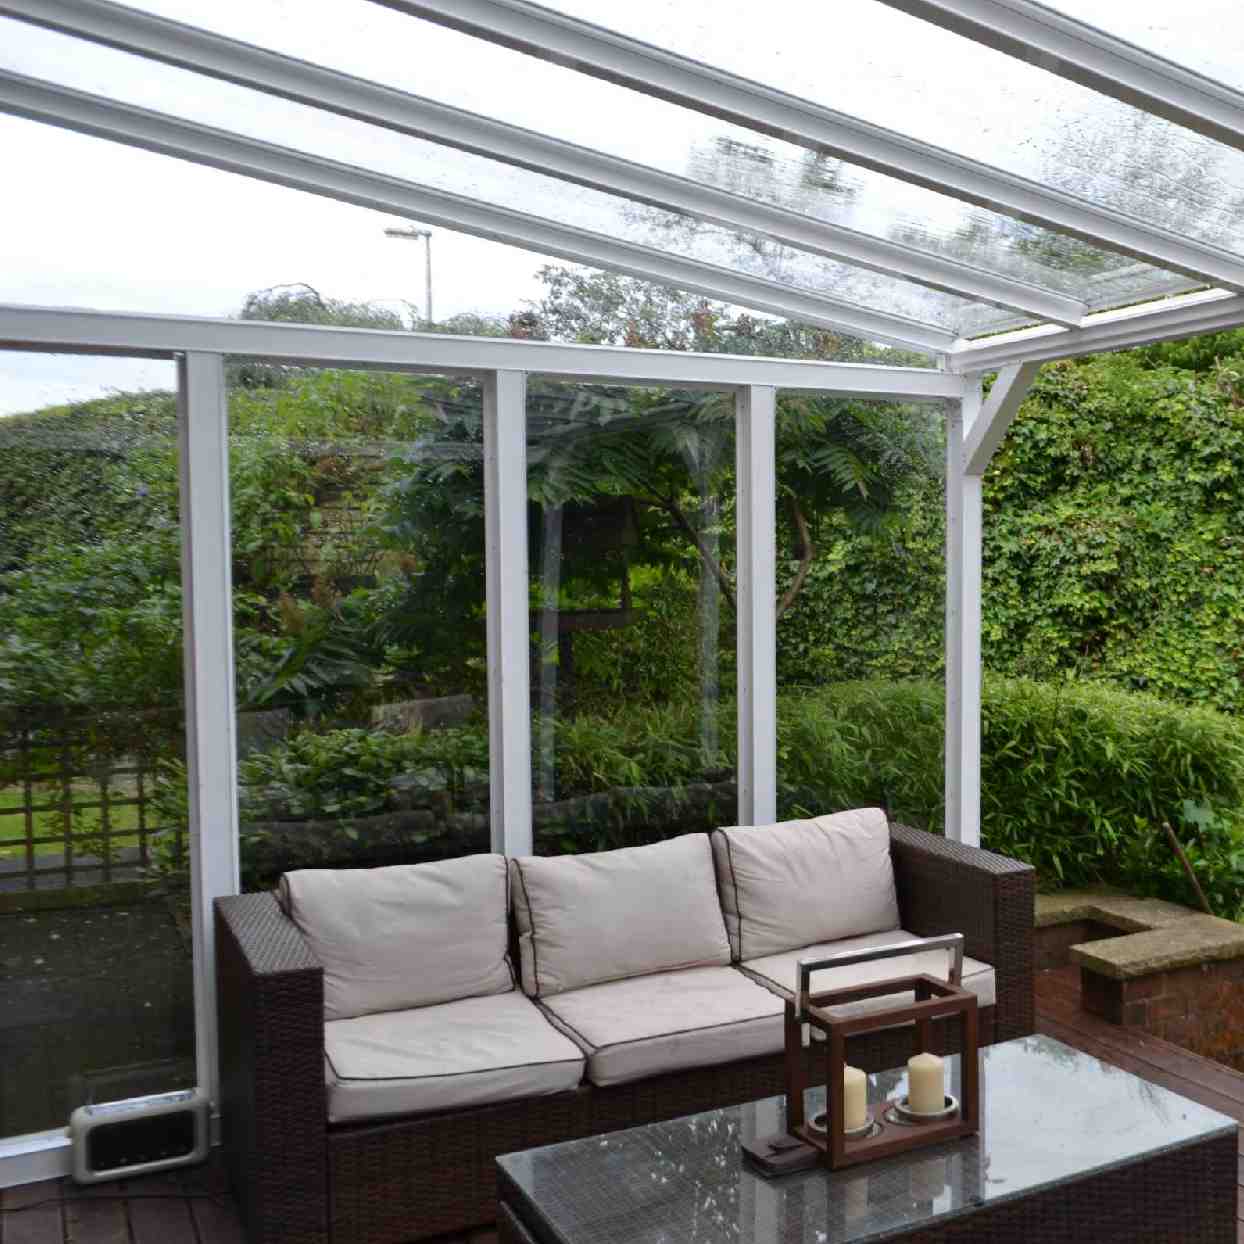 Buy Omega Verandah White with 16mm Polycarbonate Glazing - 7.0m (W) x 4.0m (P), (4) Supporting Posts online today